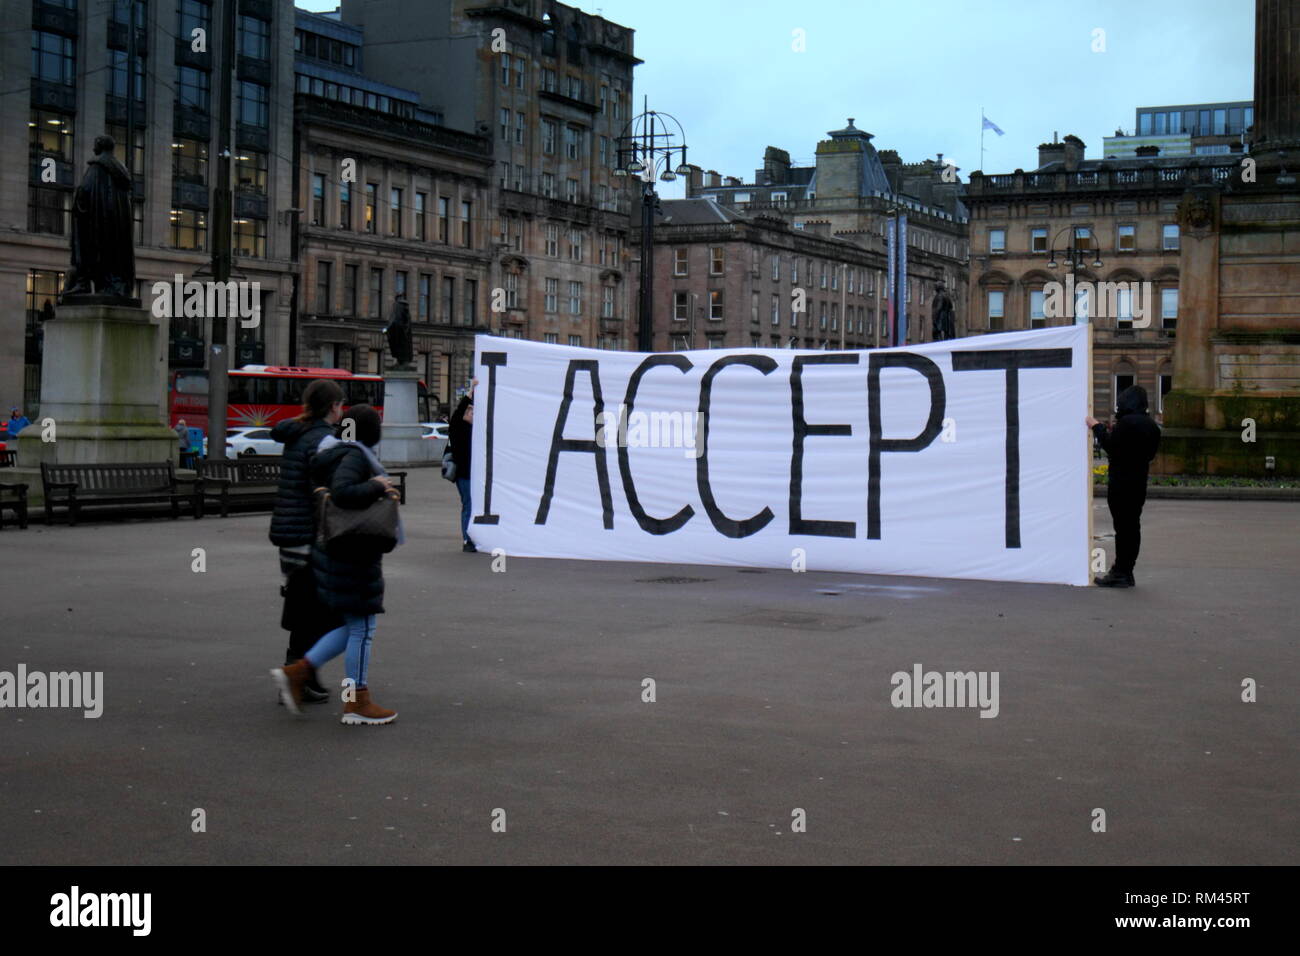 Glasgow, Scotland, UK 13th, February, 2019 On the day before valentines day a large white and black I accept banner was unfurled on the city’s George Square in front of the web cam  as passers by asked if it was a proposal confirmation it was stated as an gsa art student art project though we wait and see.  Gerard Ferry/Alamy Live News Stock Photo